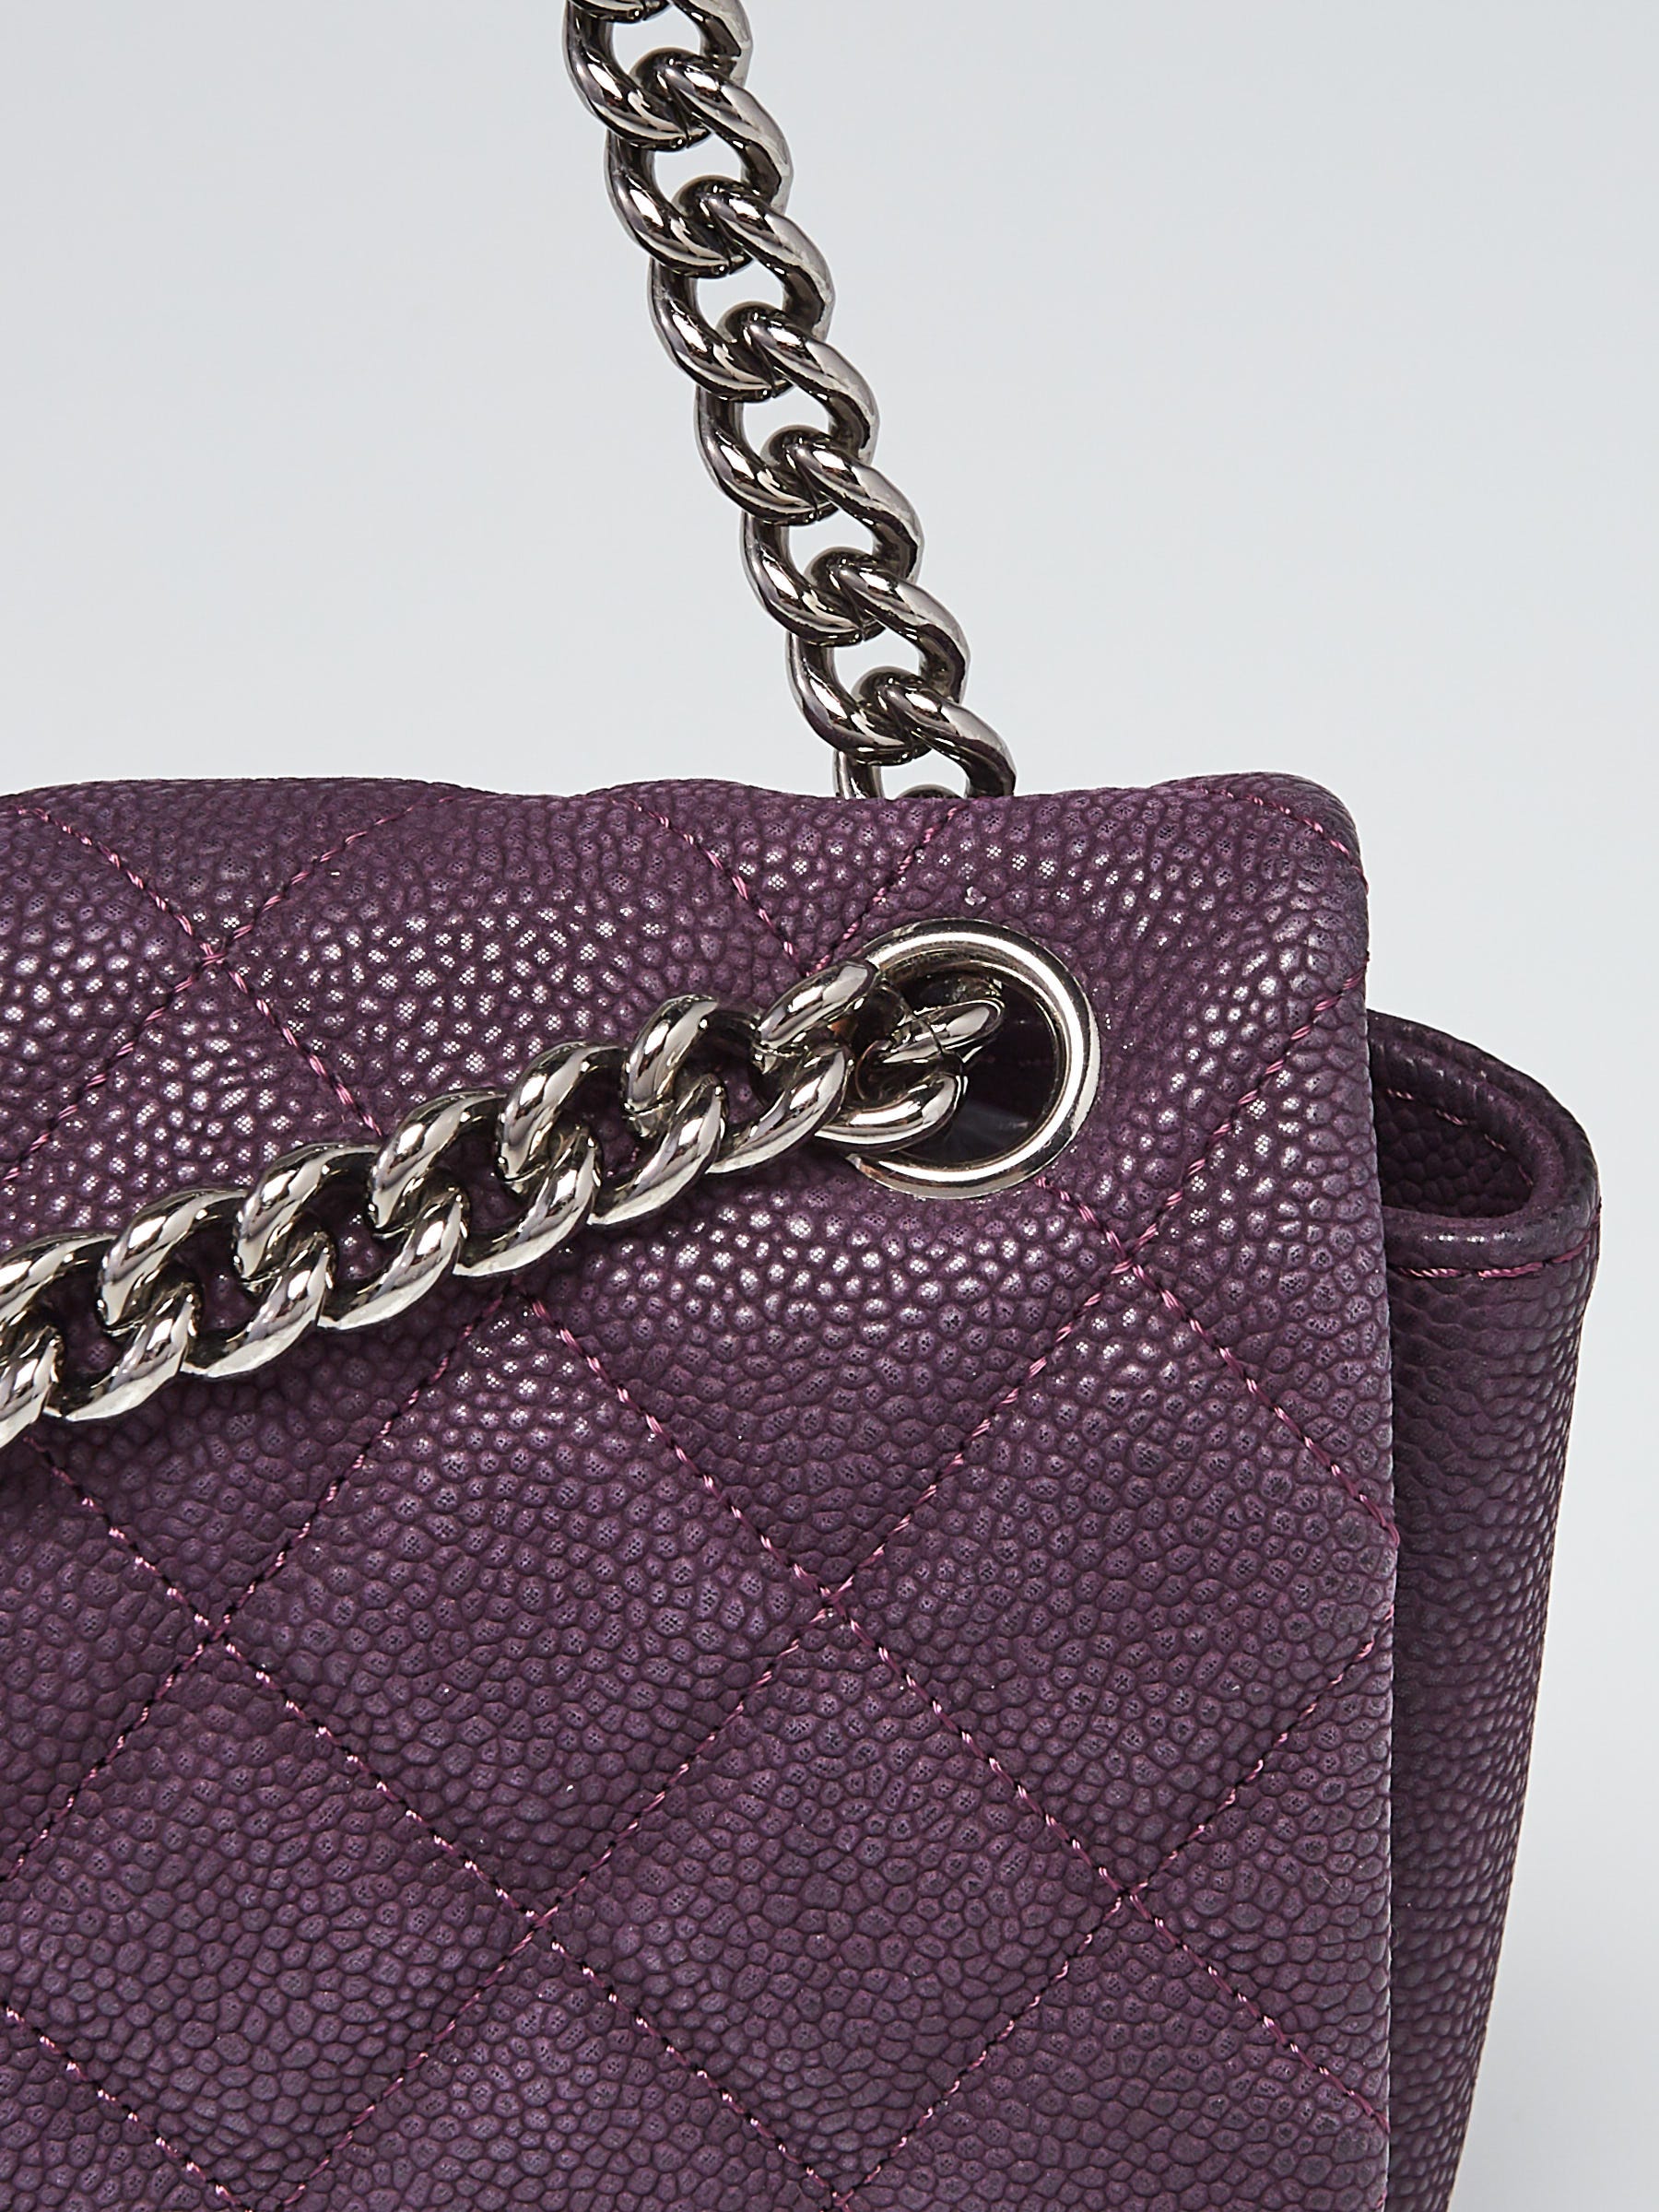 CHANEL Caviar Quilted Zipped Key Holder Case Purple 548869